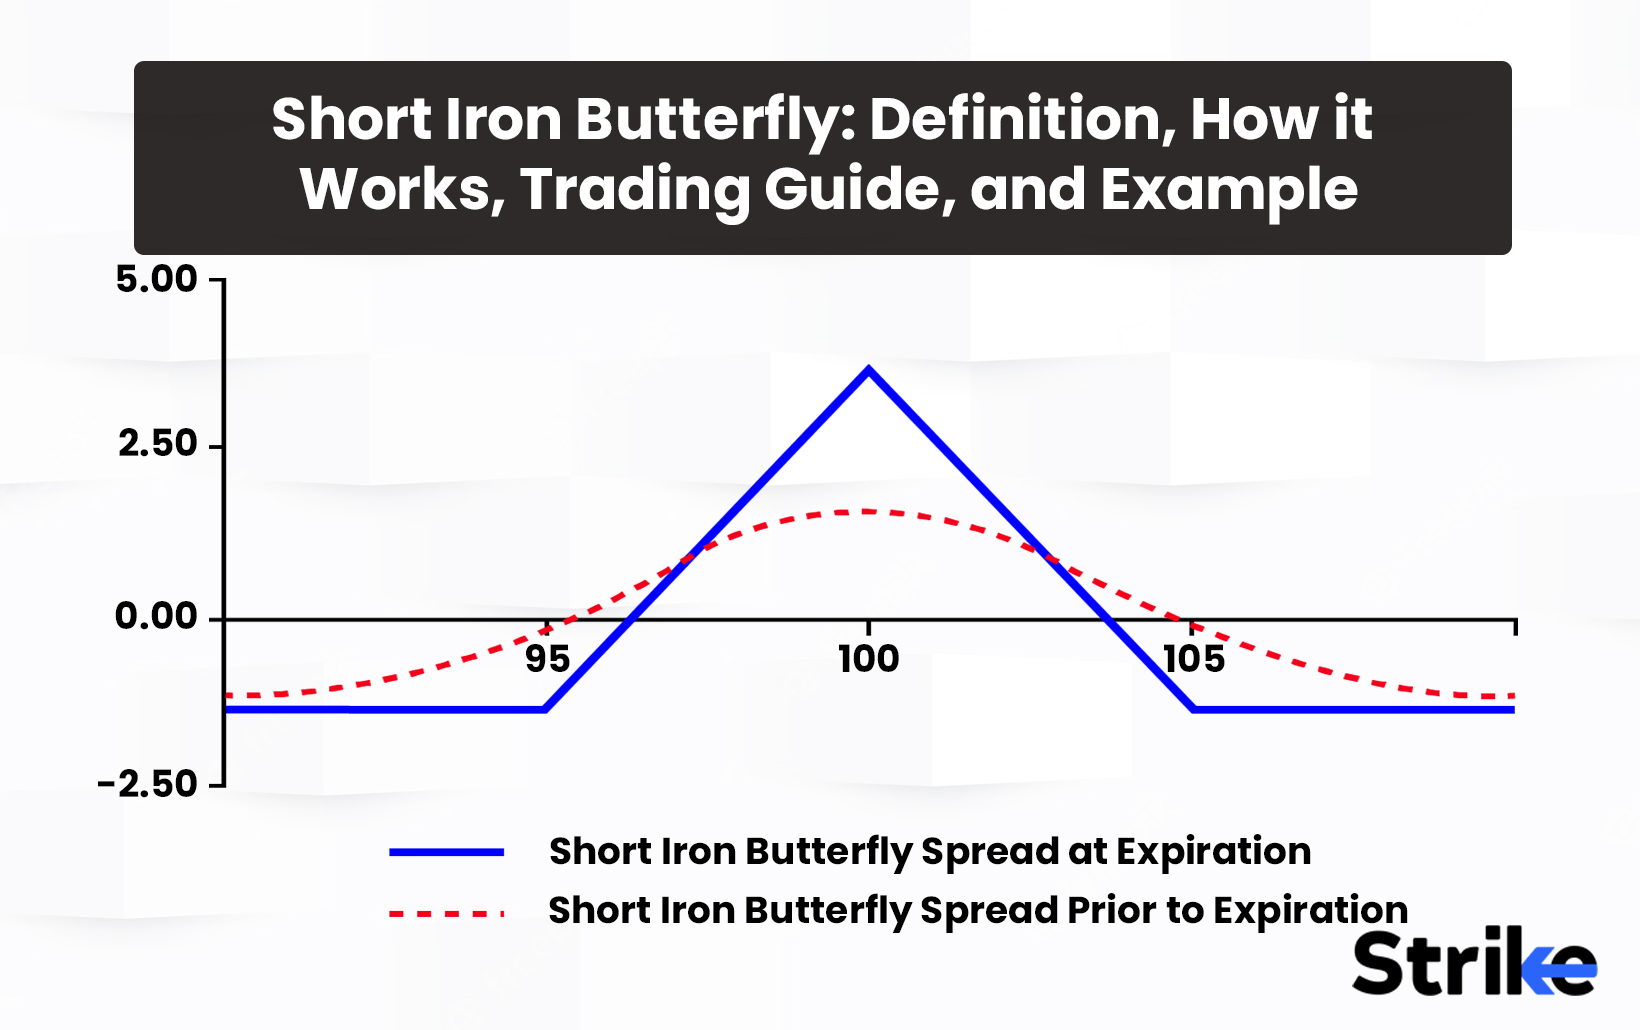 Short Iron Butterfly: Definition, How it Works, Trading Guide, and Example